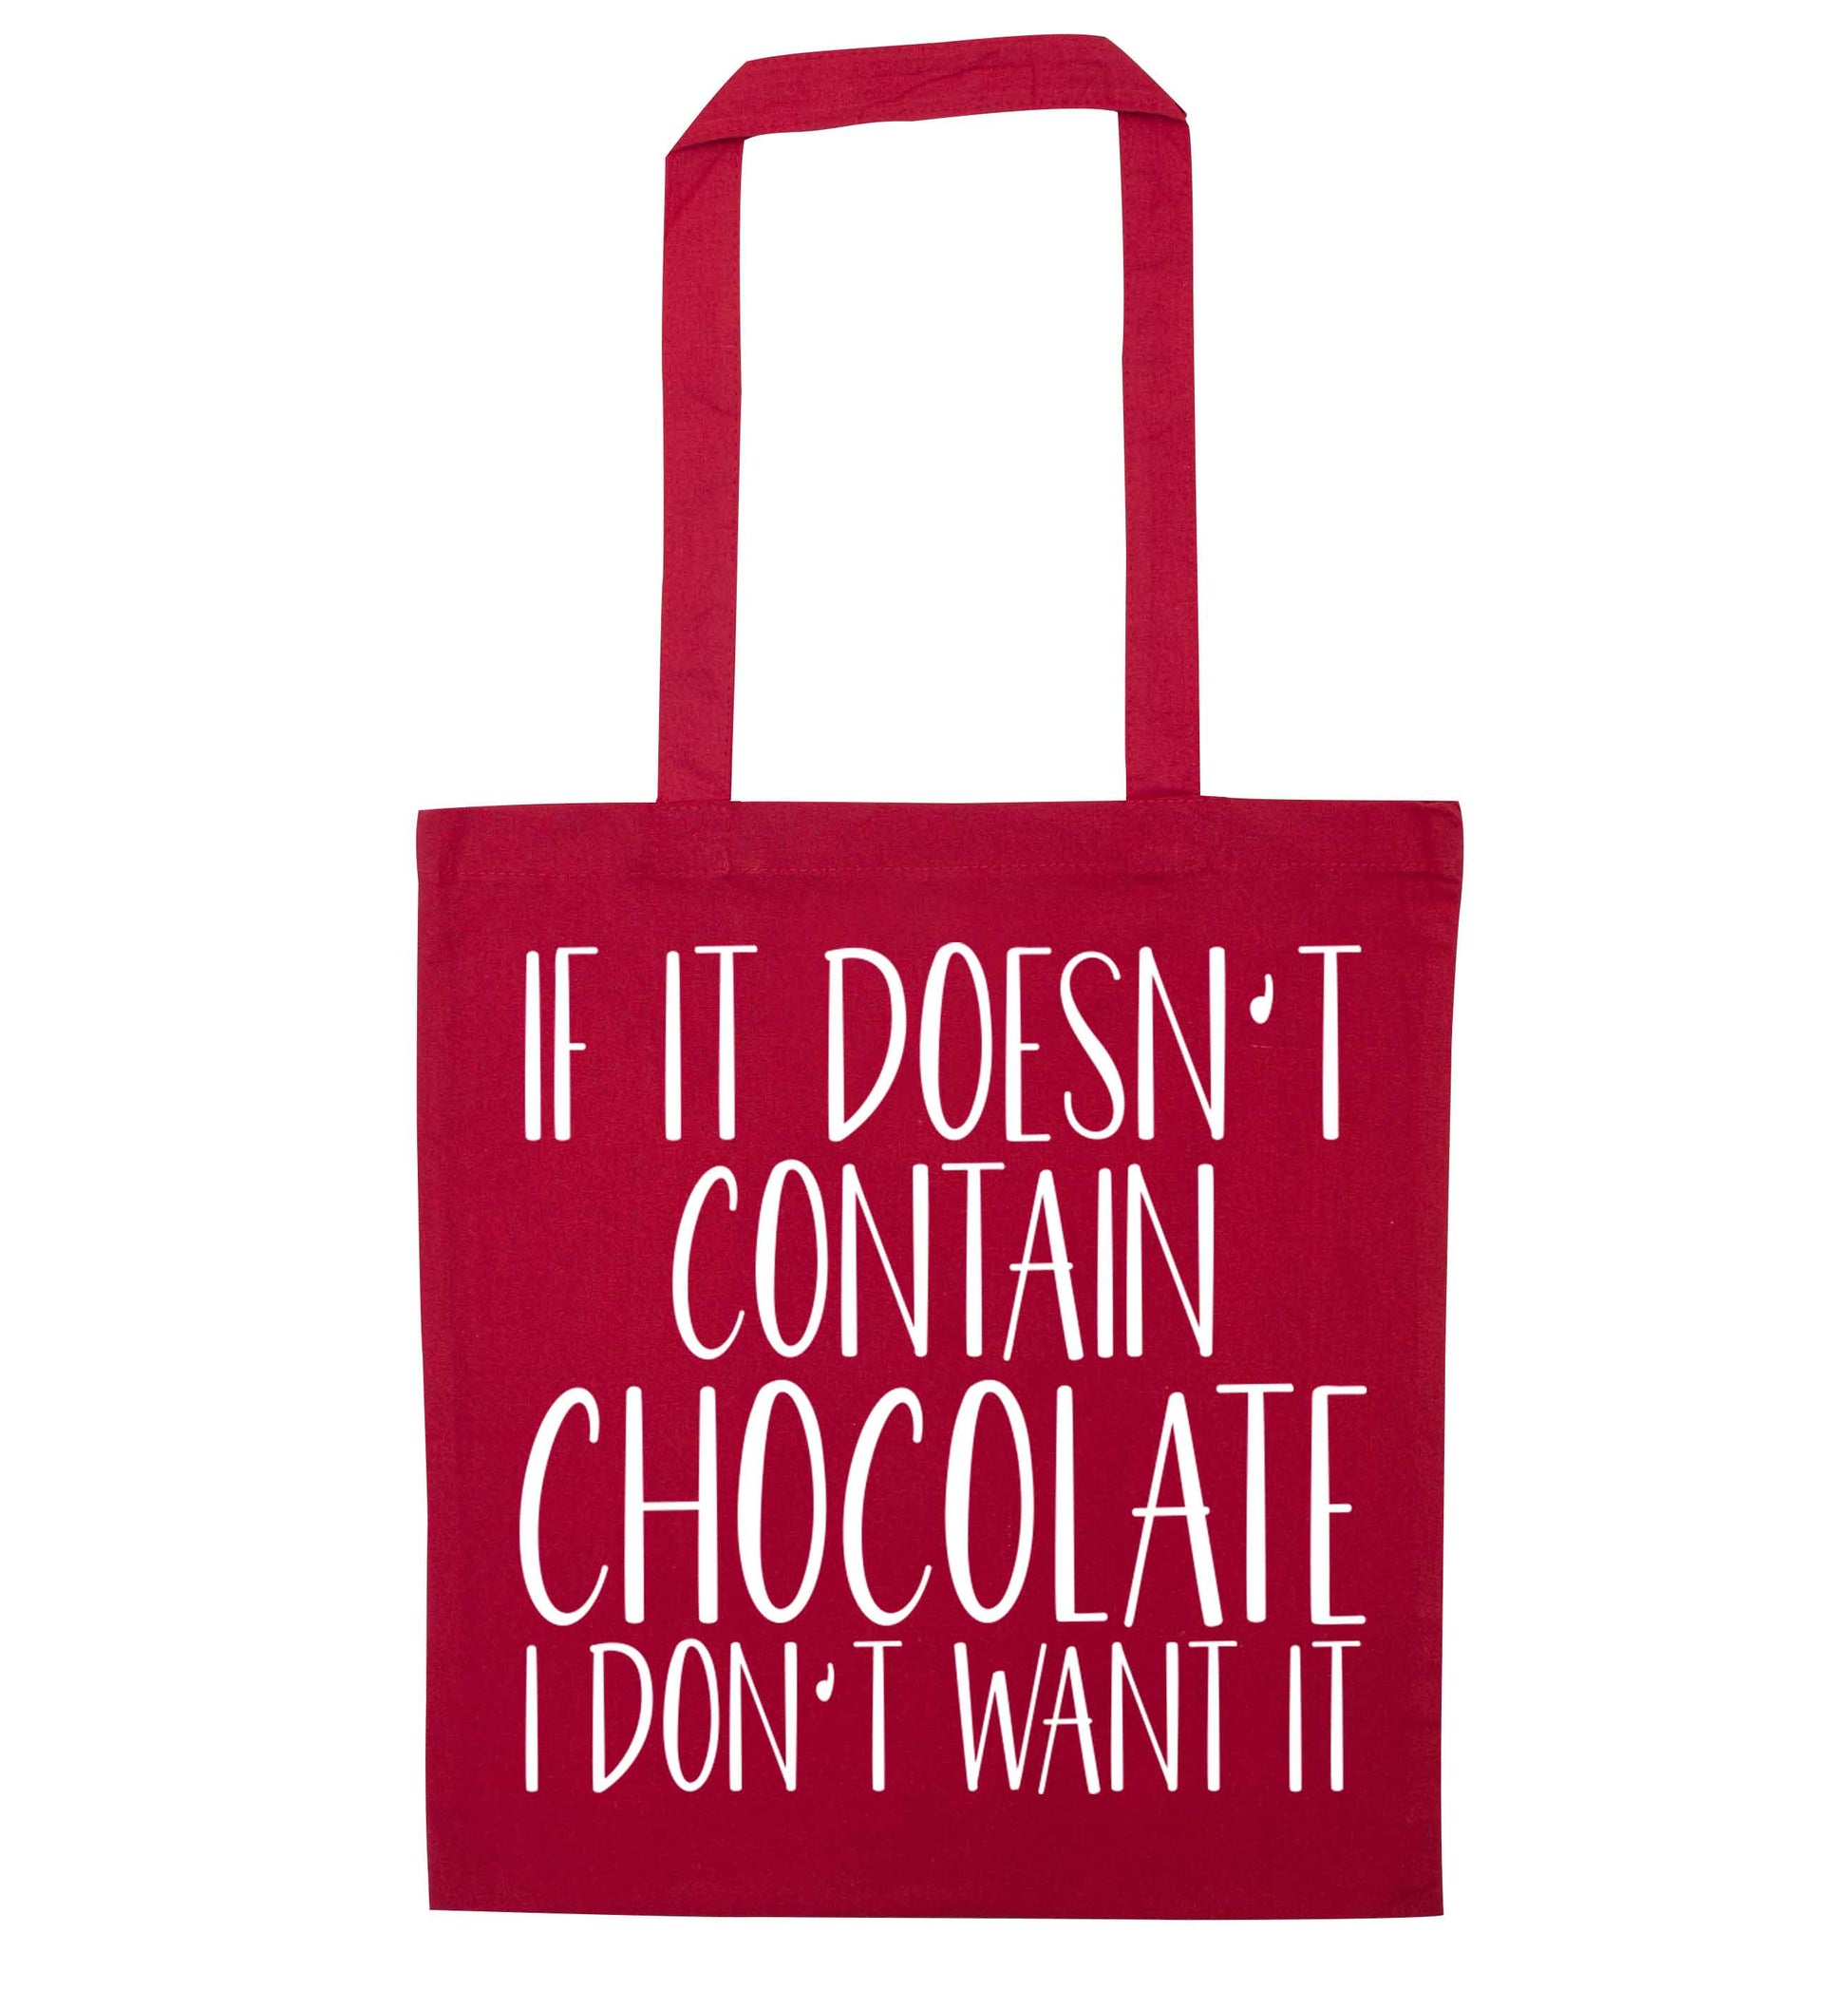 If it doesn't contain chocolate I don't want it red tote bag